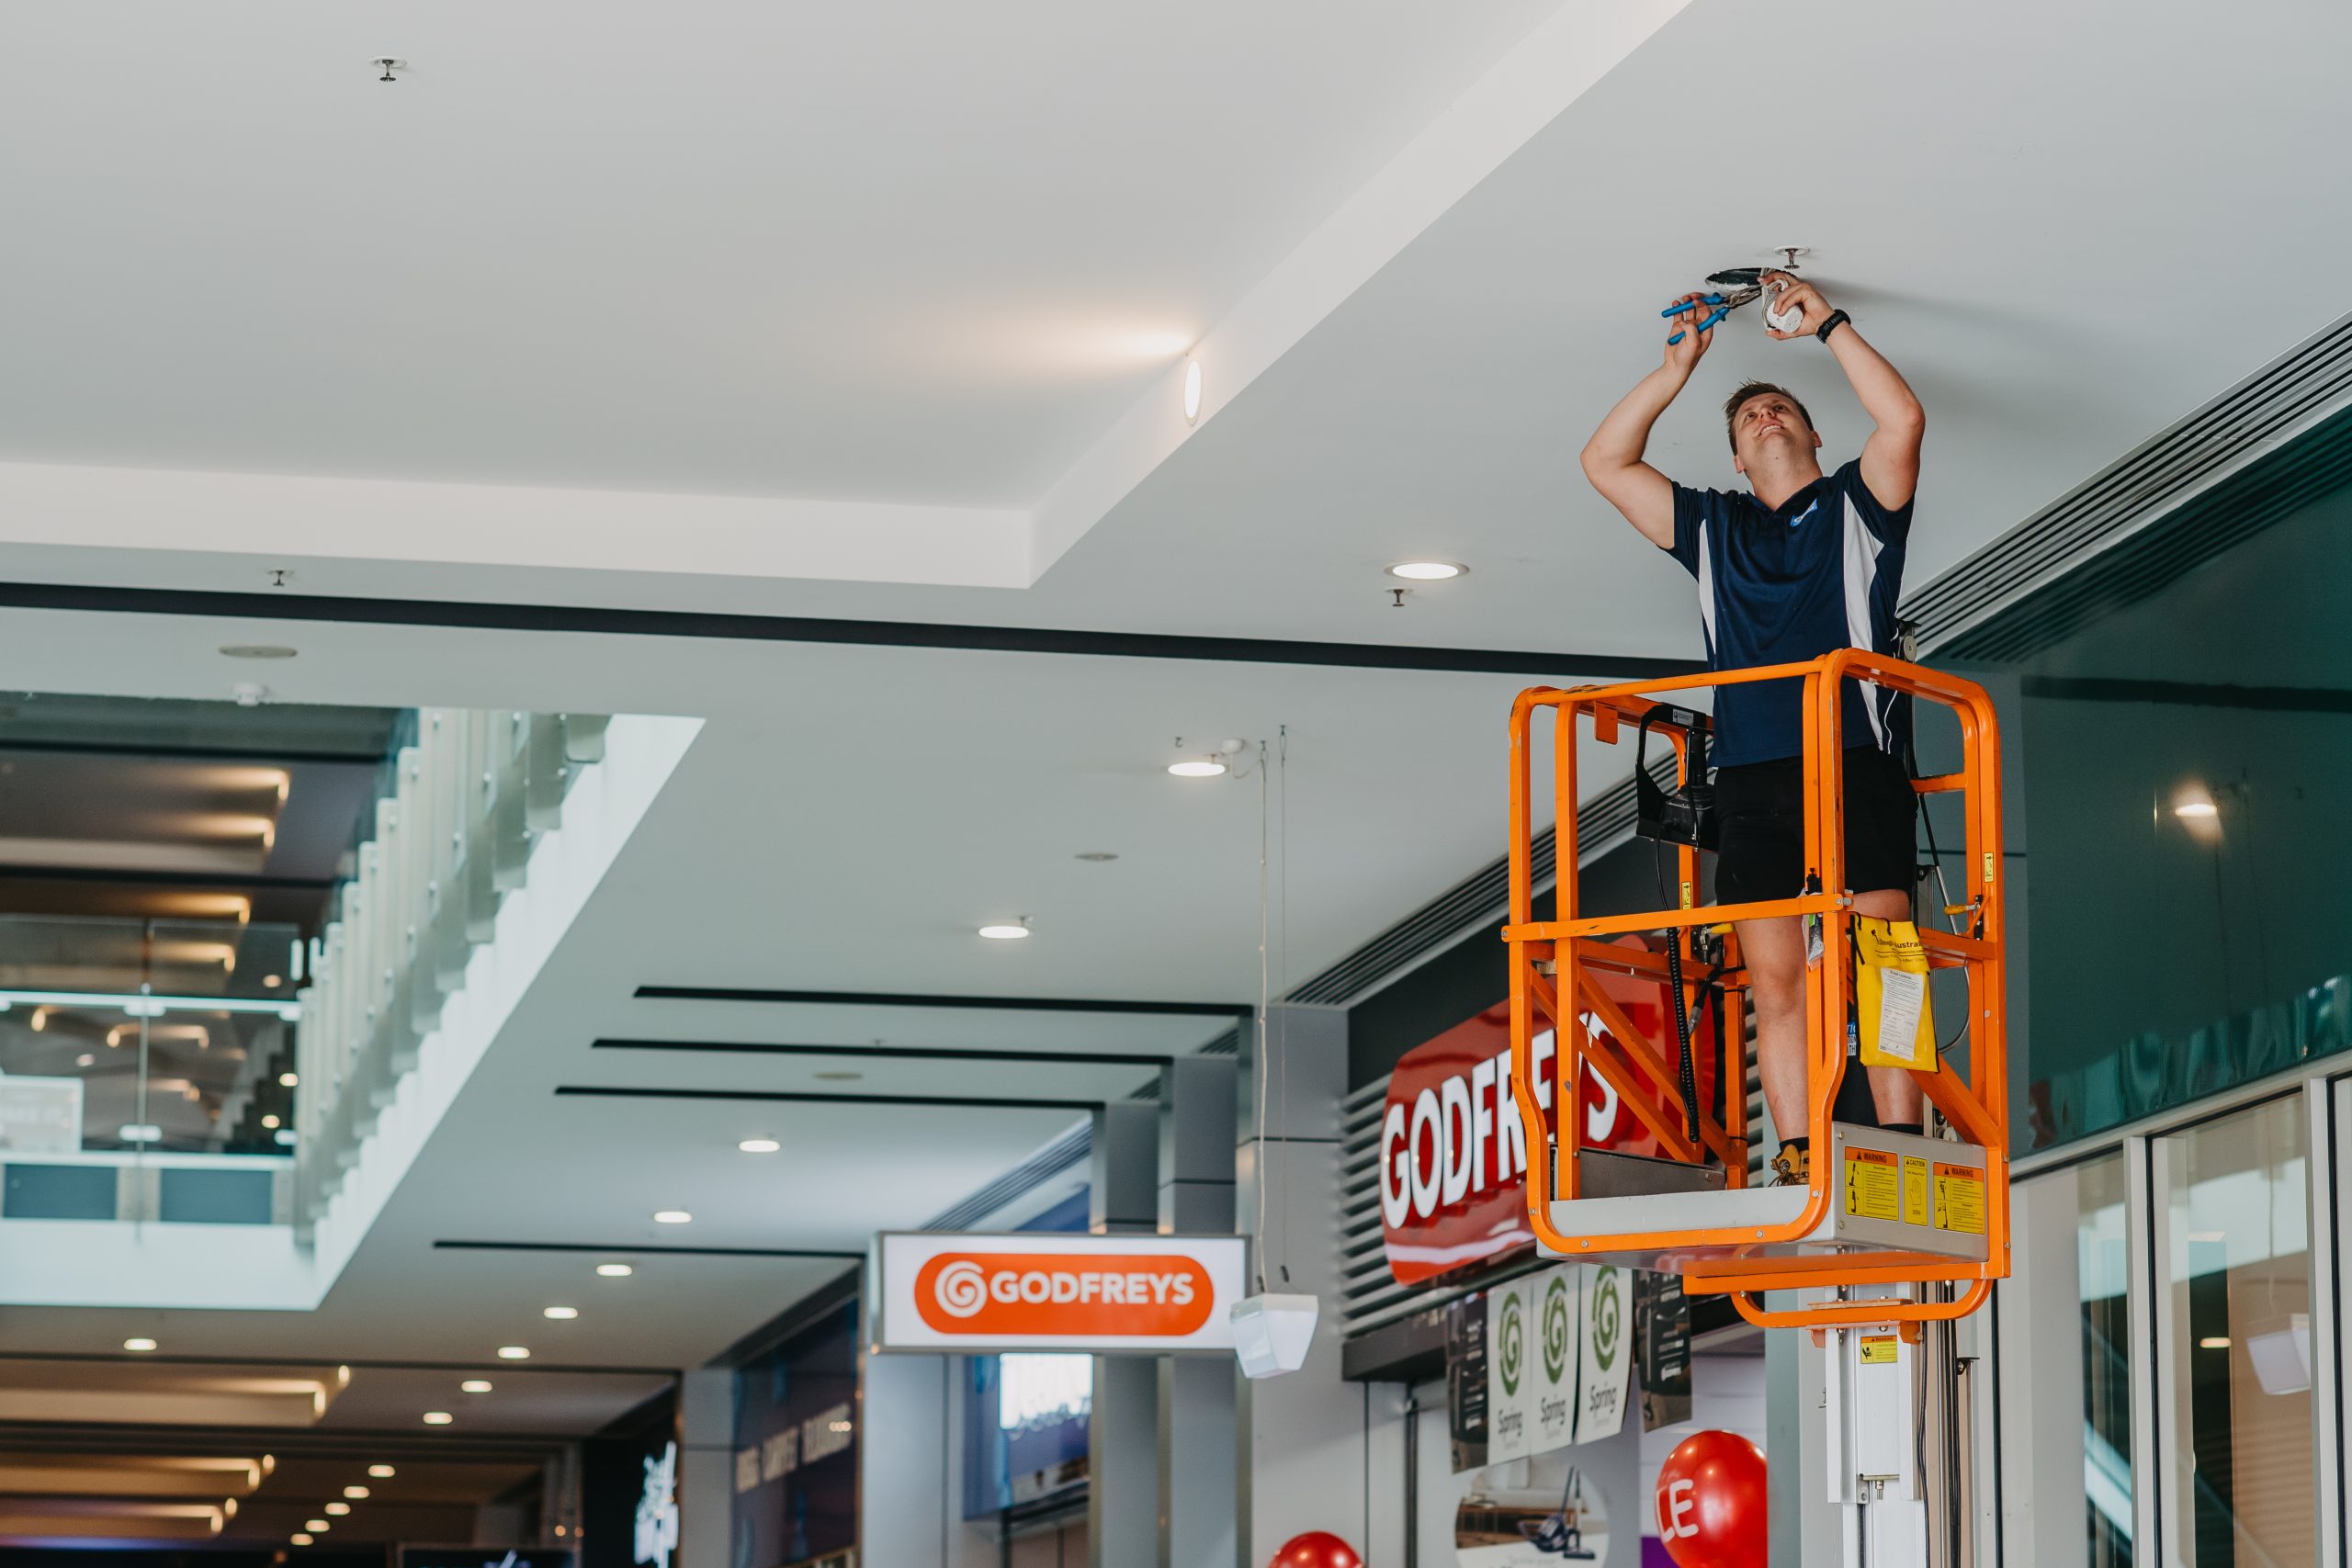 Upgrade your commercial lights to LED for FREE before 2023.